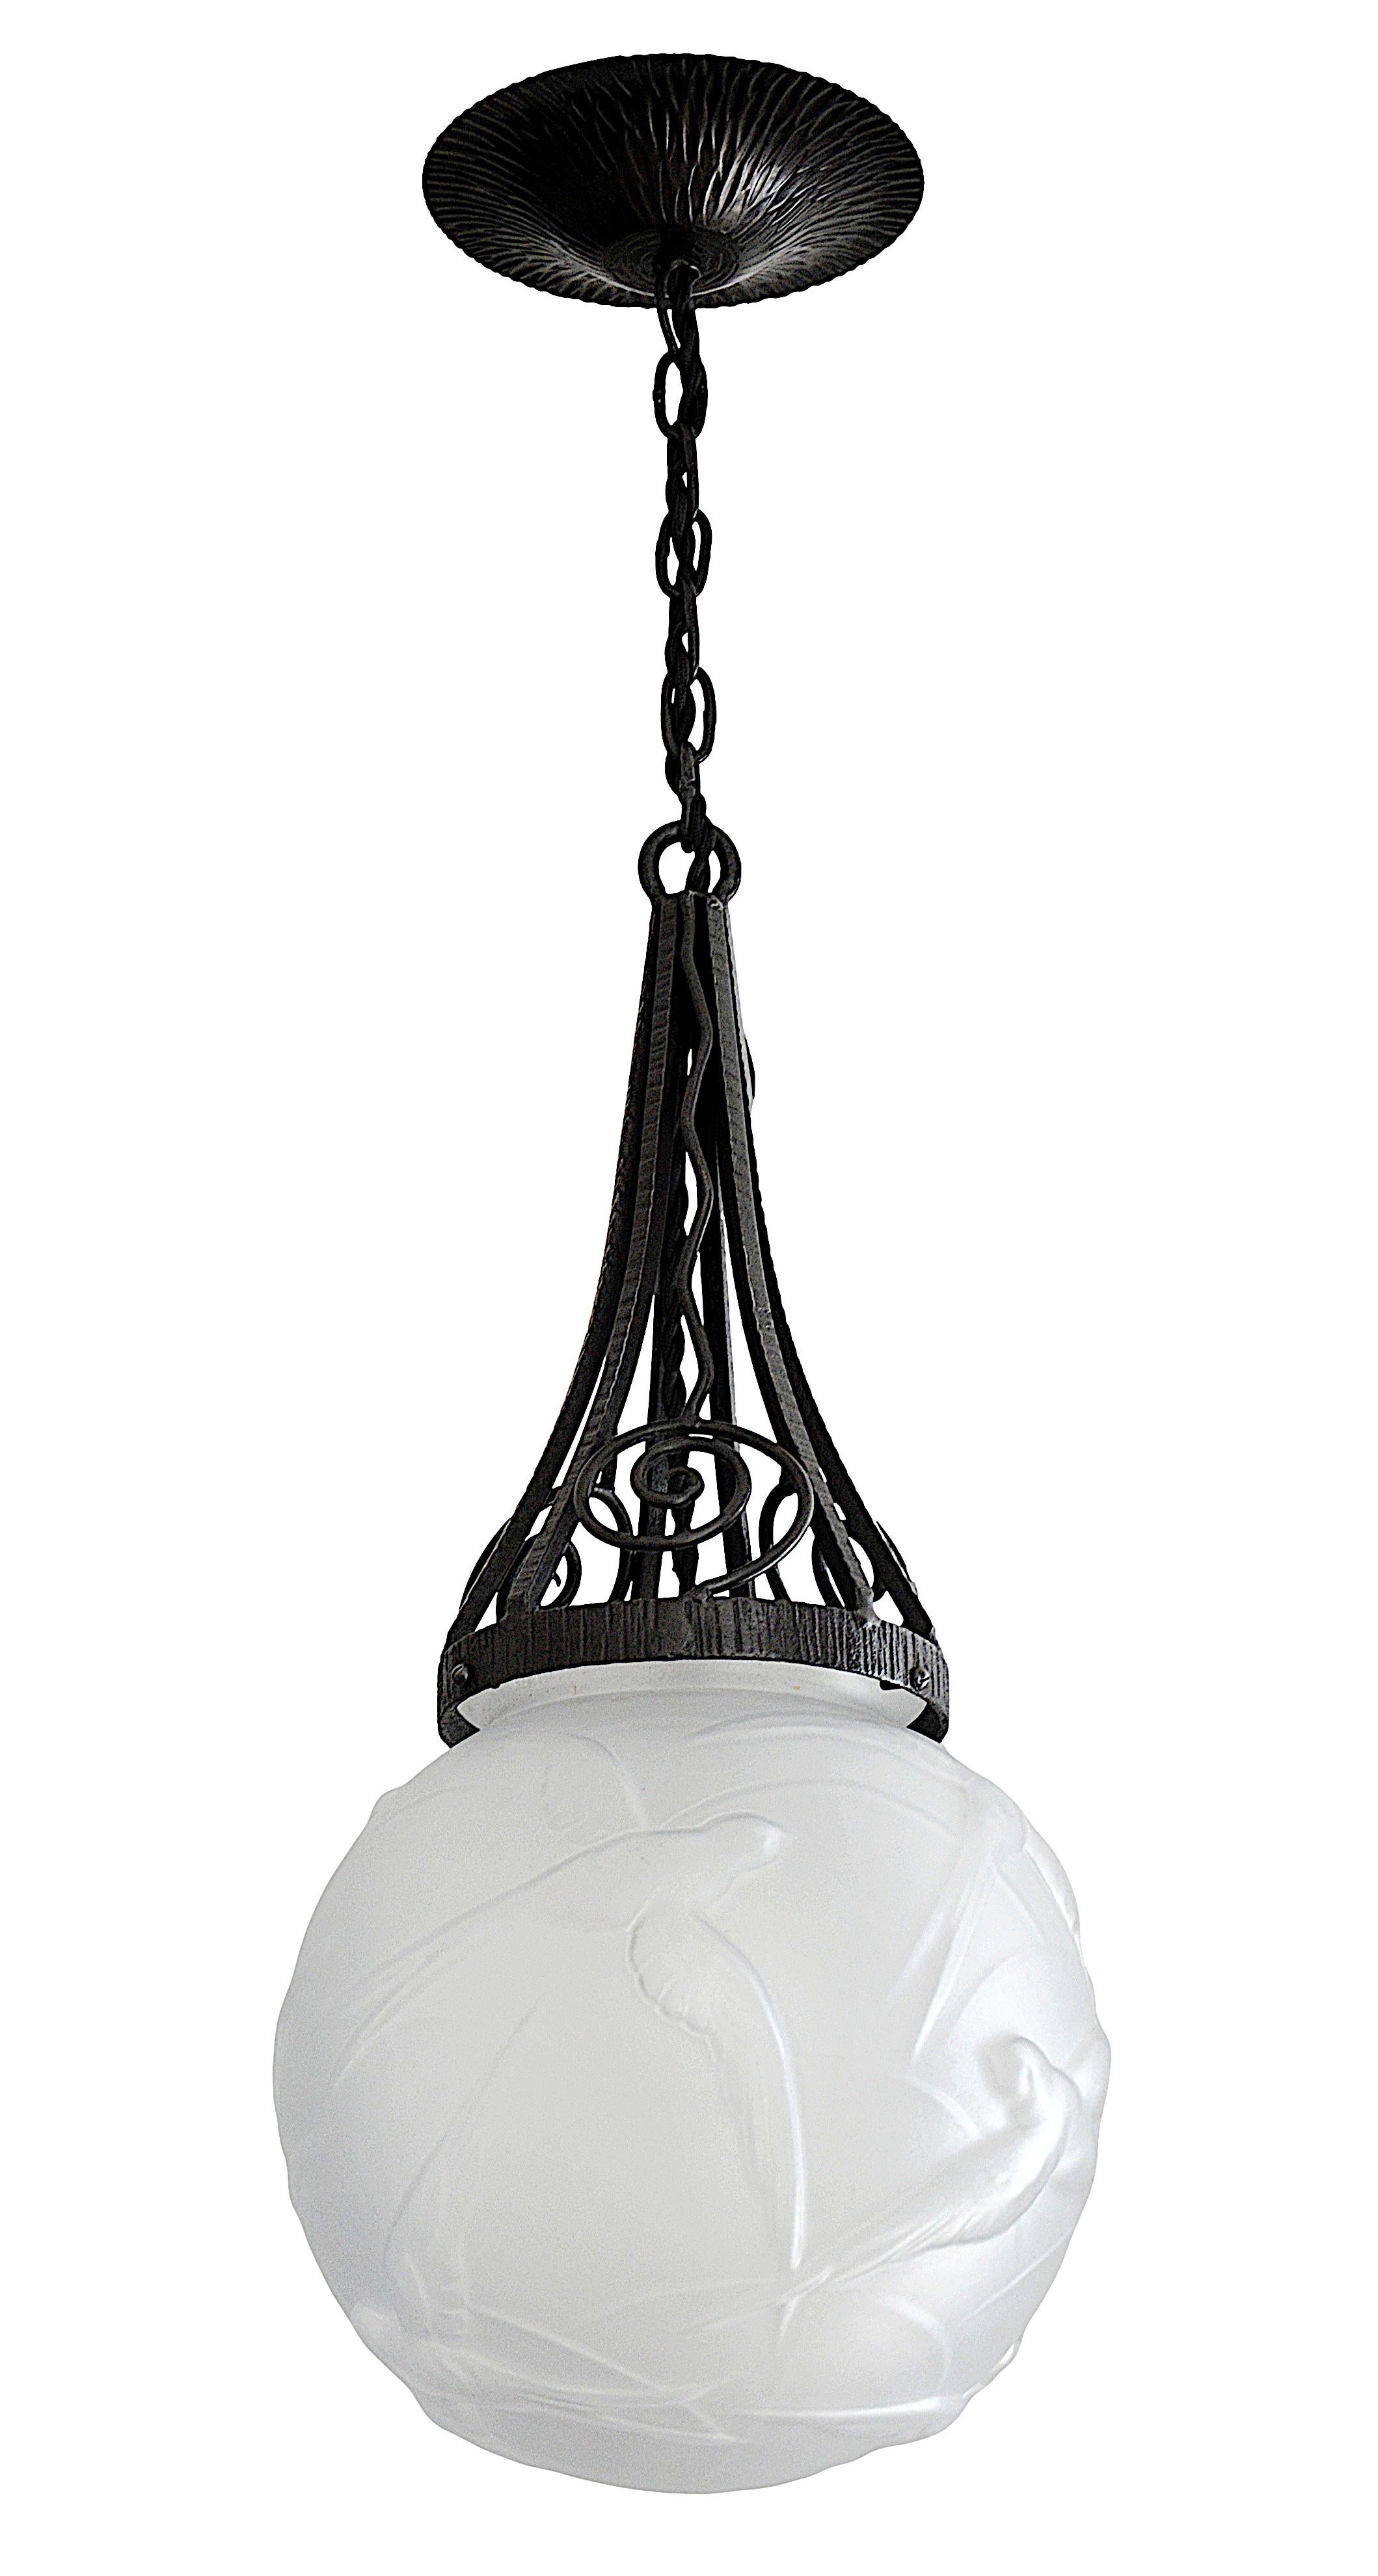 French Art Deco ceiling-light by CLA (Paris), France, ca.1925. Frosted glass and wrought-iron. 6 swallows in the sky. Molded glass shade hung on its wrought-iron fixture. Height : 62cm (24.4